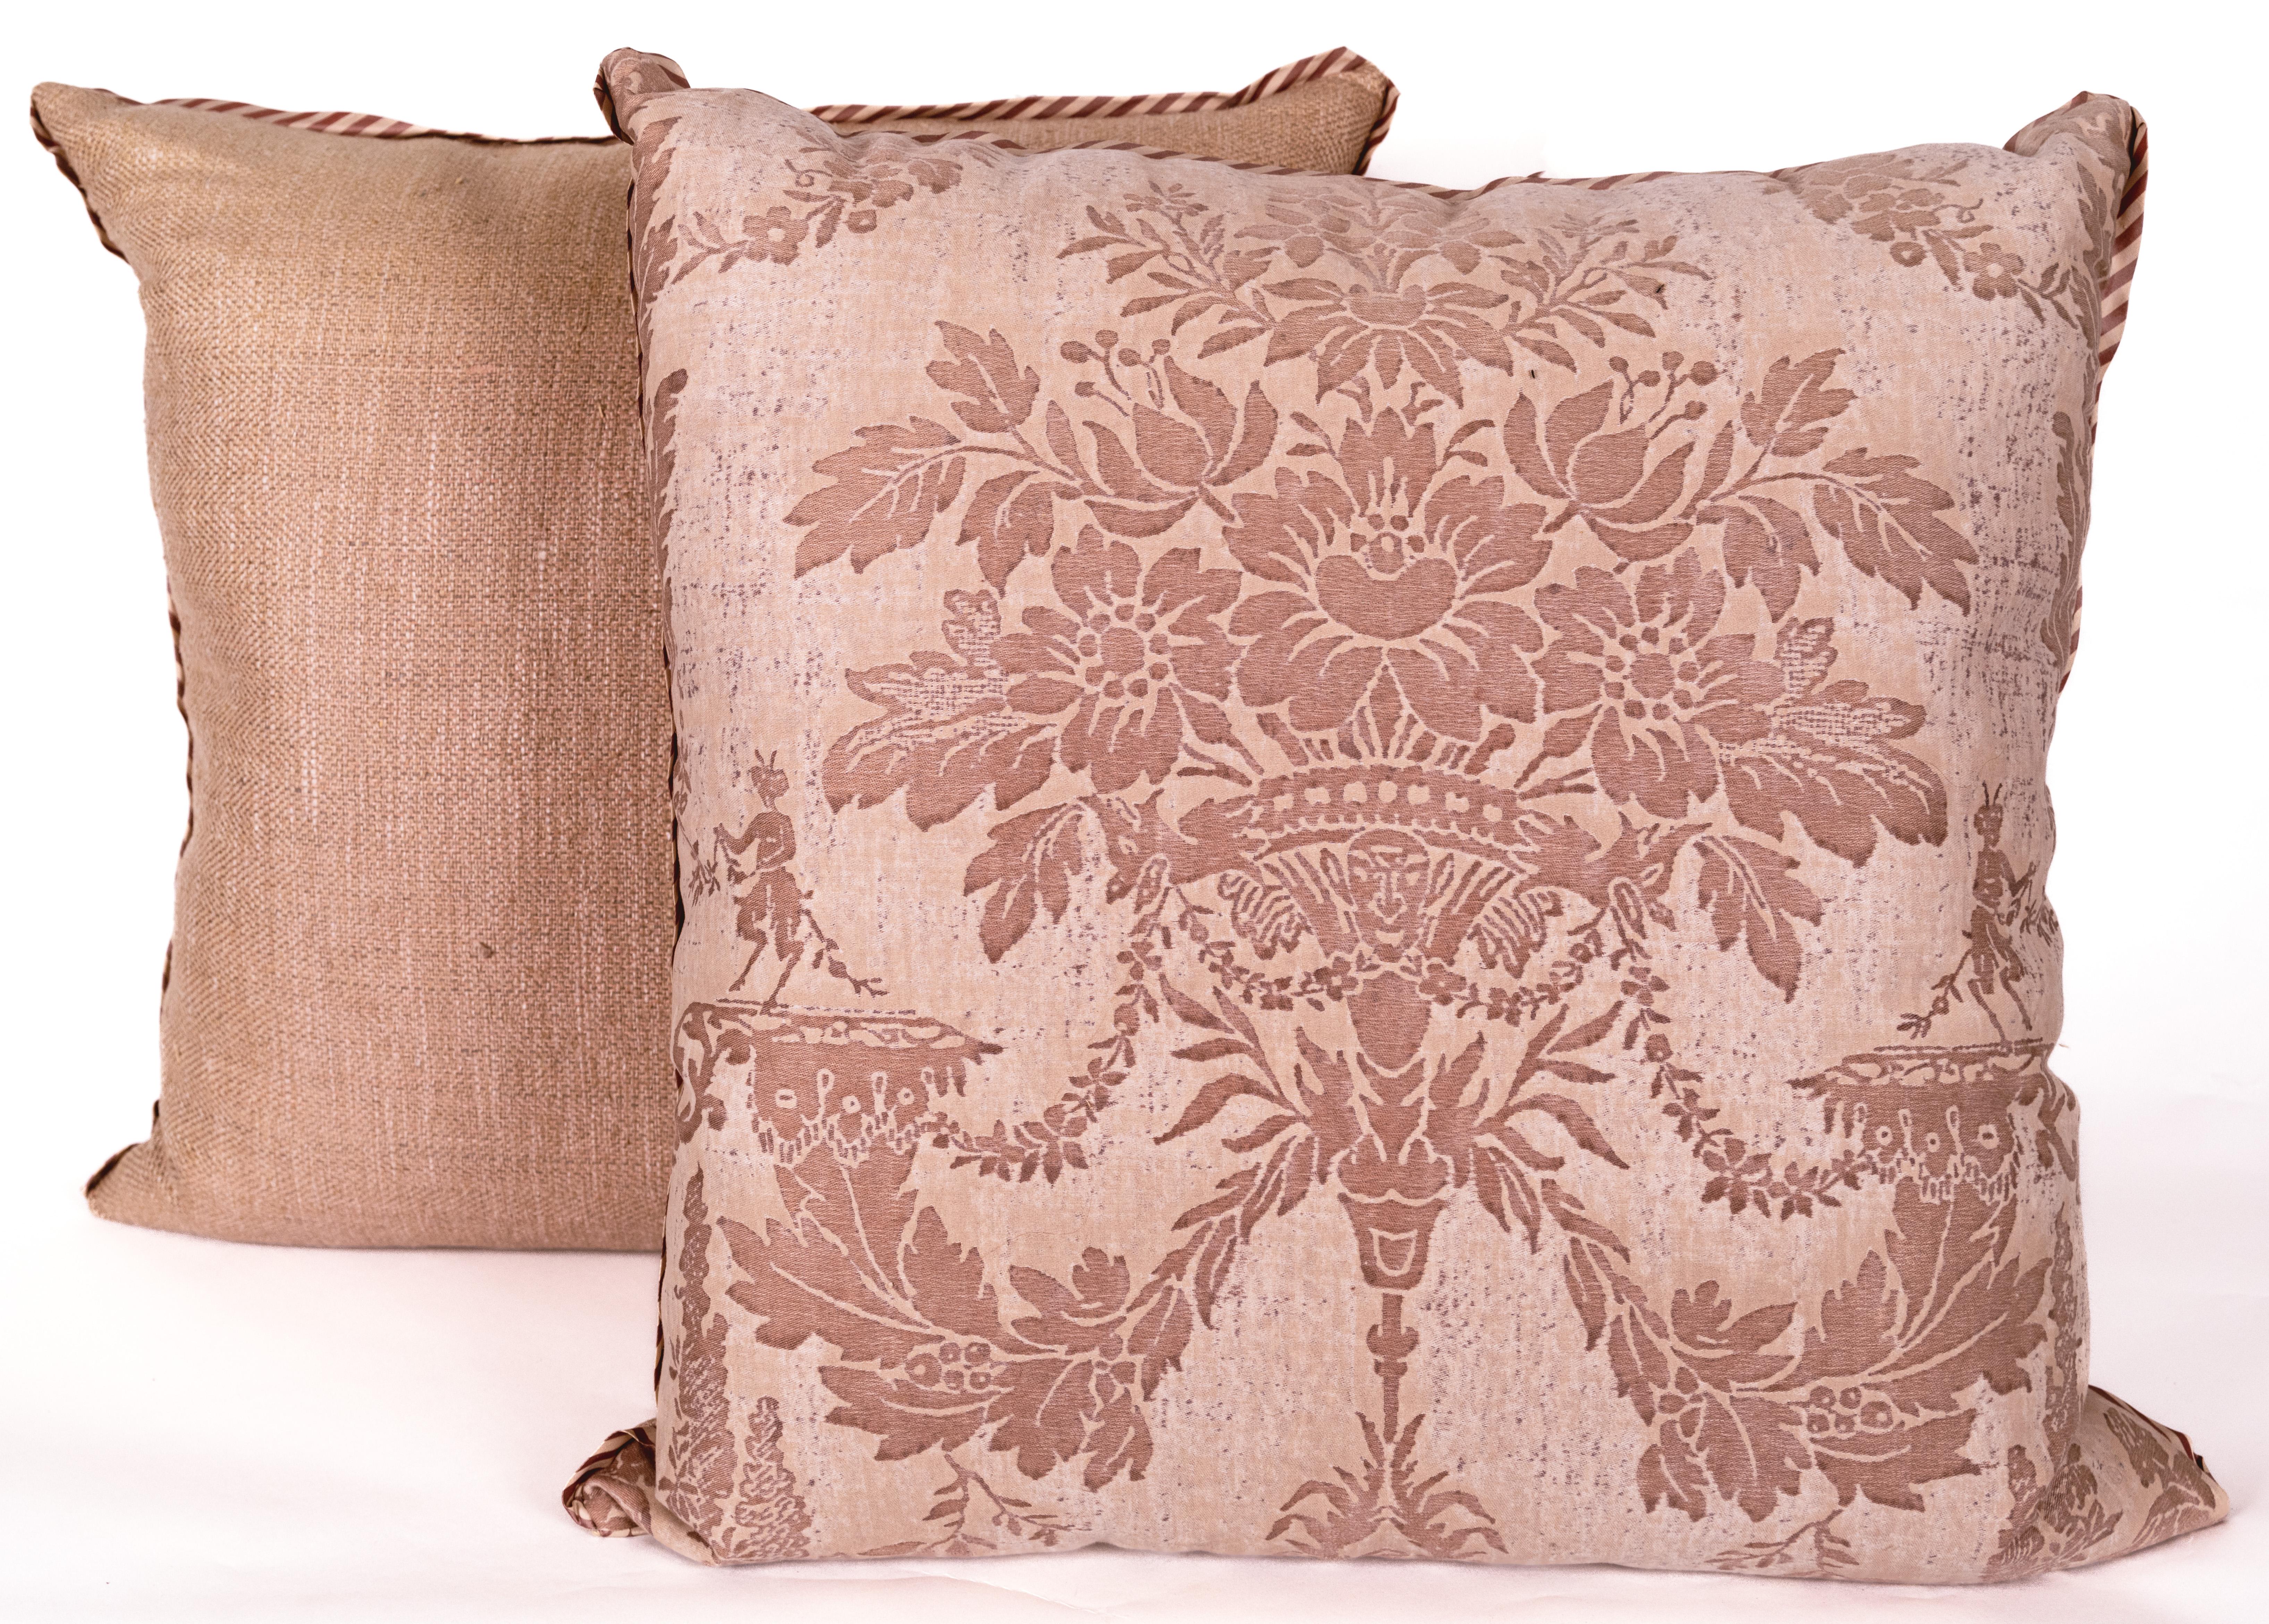 A pair of cushions in the now discontinued Fortuny 'Boucher' fabric. A classic damask style featuring flowers and Satyrs, rendered in a mottled Mauve.